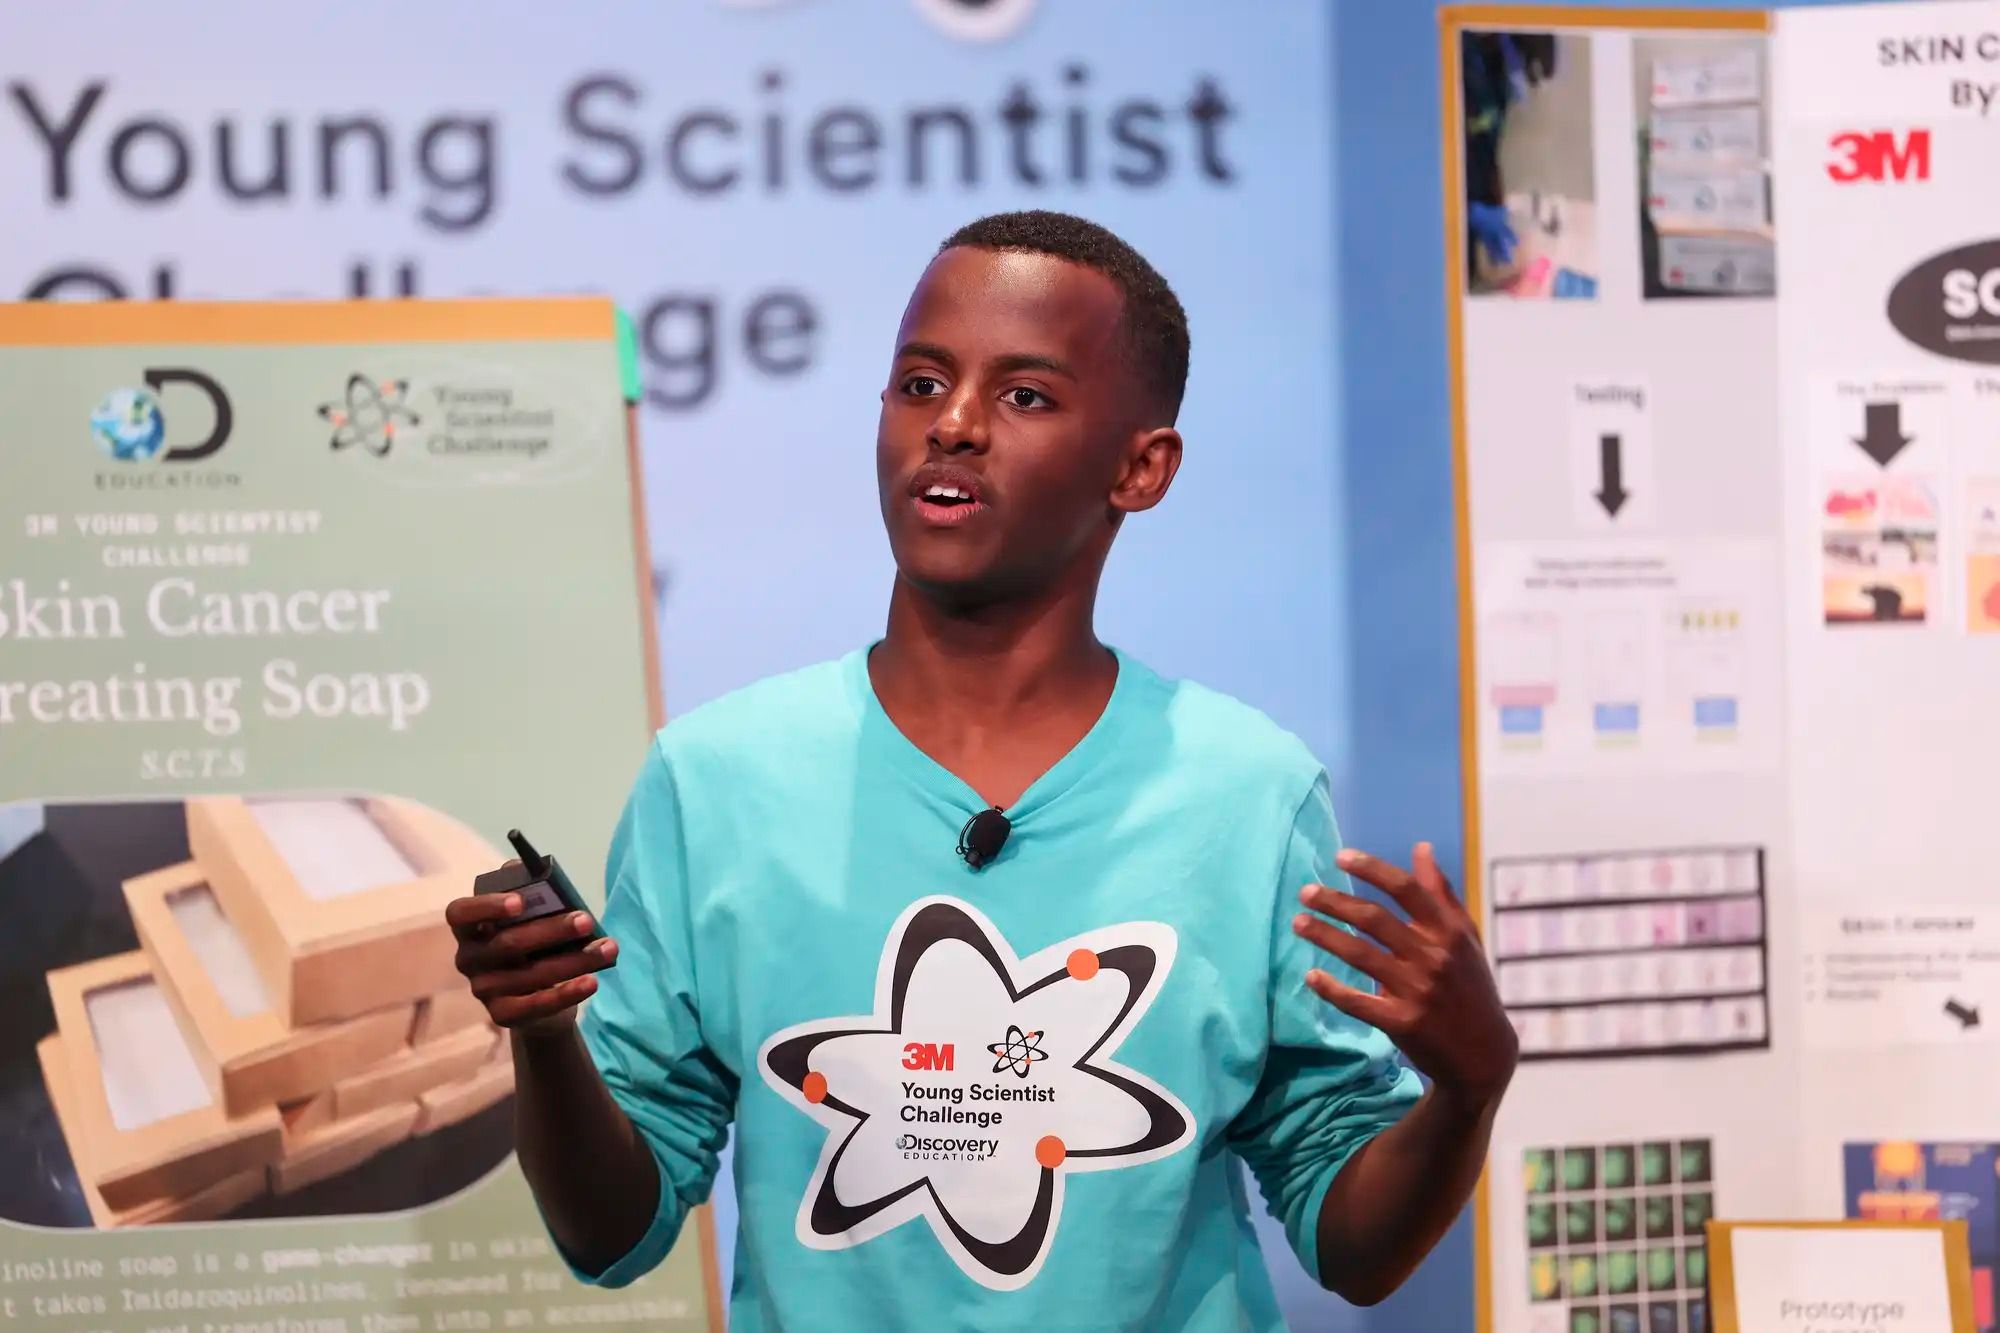 14-Year-Old Named America’s Top Young Scientist For Inventing Soap That Treats Skin Cancer